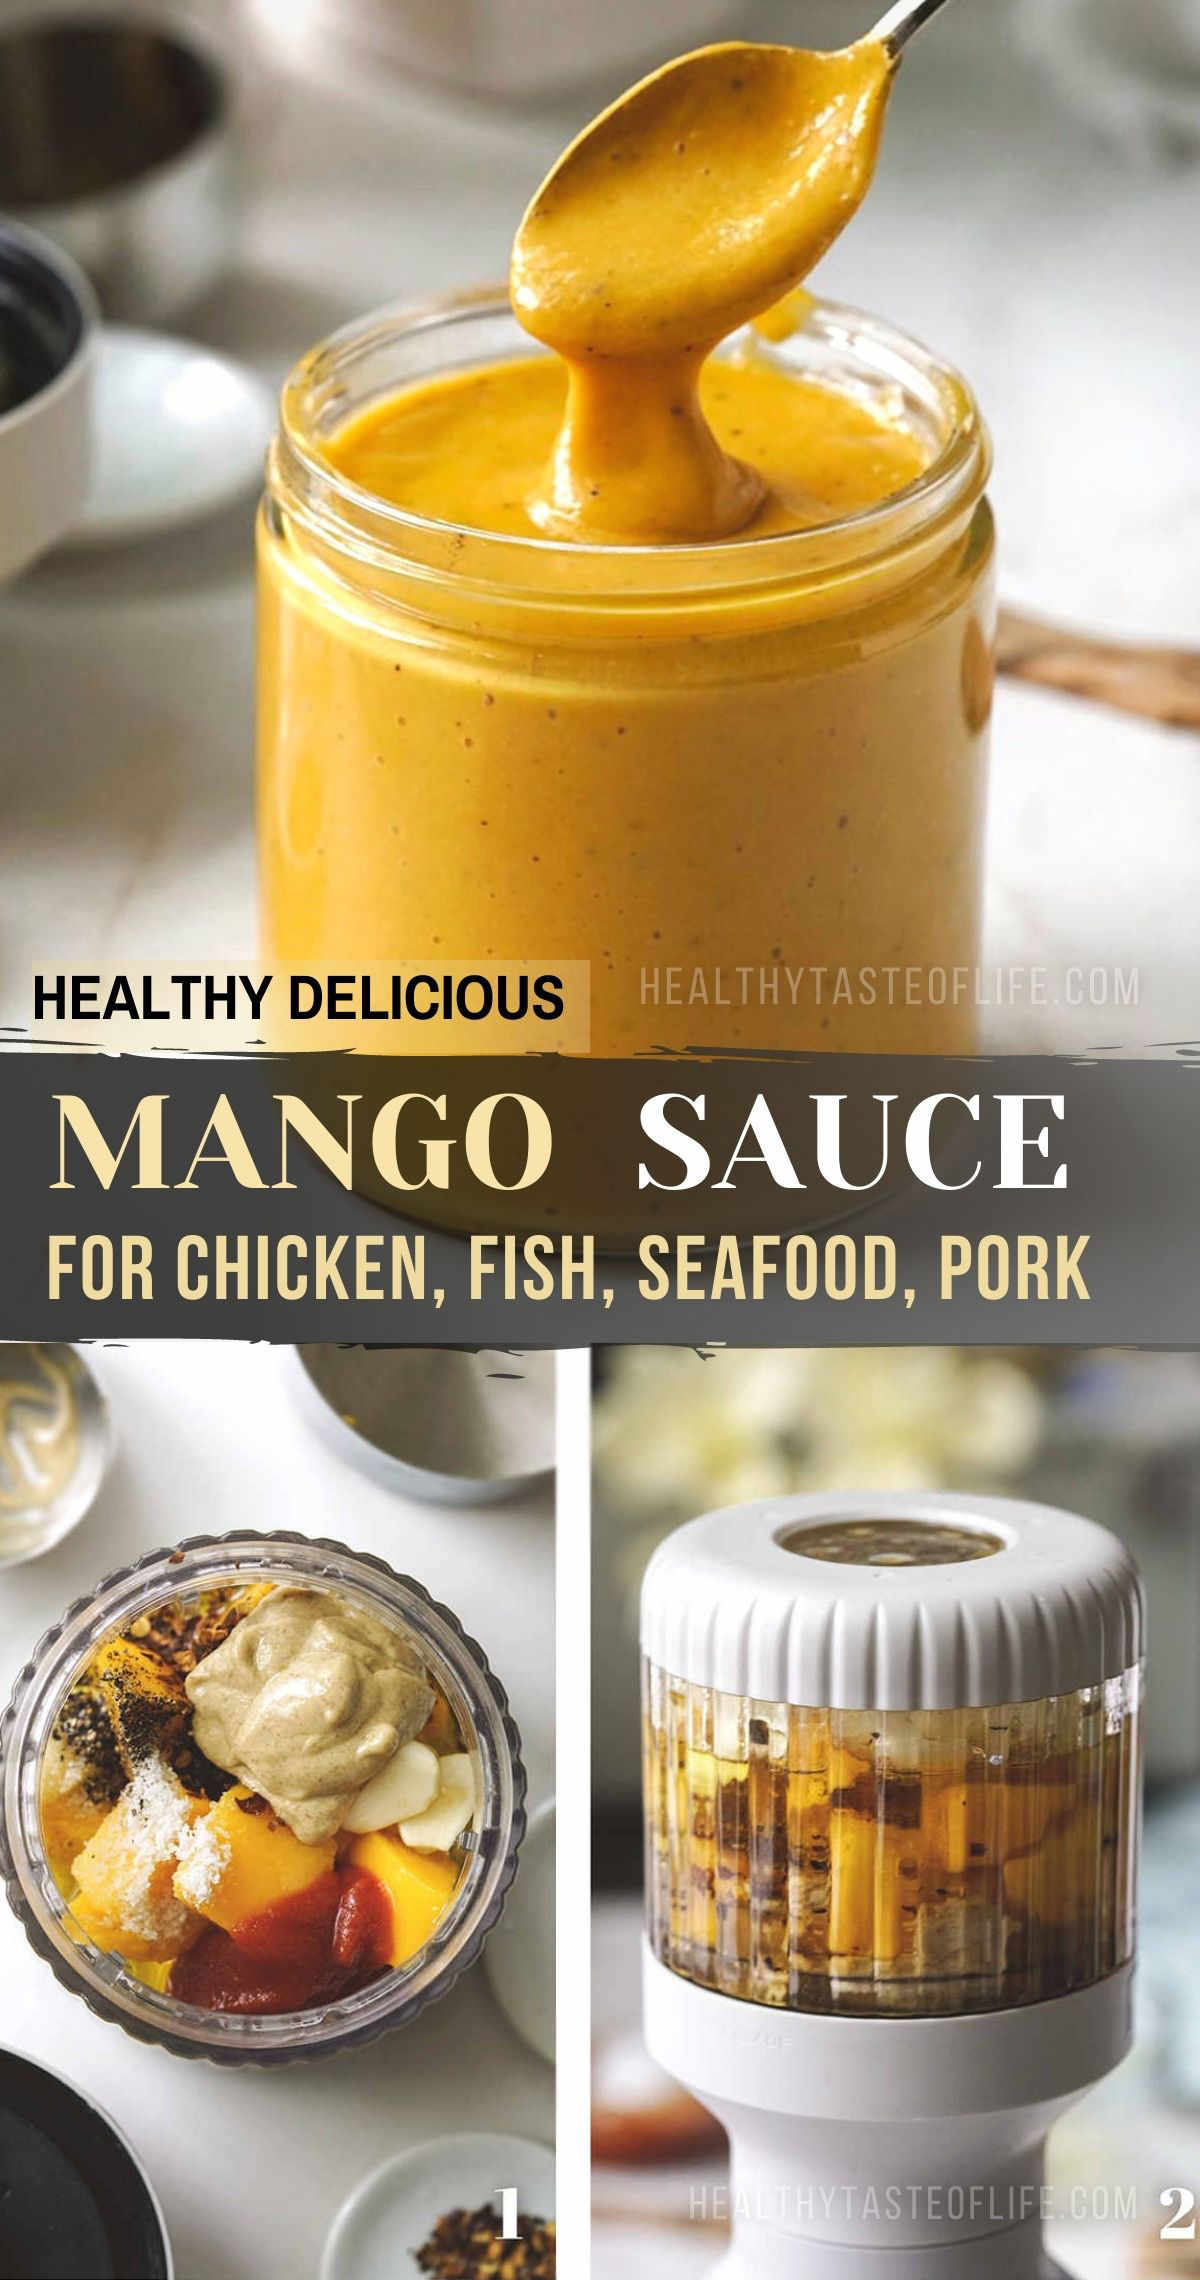 Sweet mango sauce with fruity notes and a slight kick, perfect as marinade for chicken, fish and seafood, or for topping the grilled meat and veggies. You can also use this creamy mango sauce as pasta sauce or drizzled over salads to jazz them up. Make this mango sauce recipe hot and spicy with habanero peppers or light and sweet, it's up to you! #mangosauce #mangorecipe